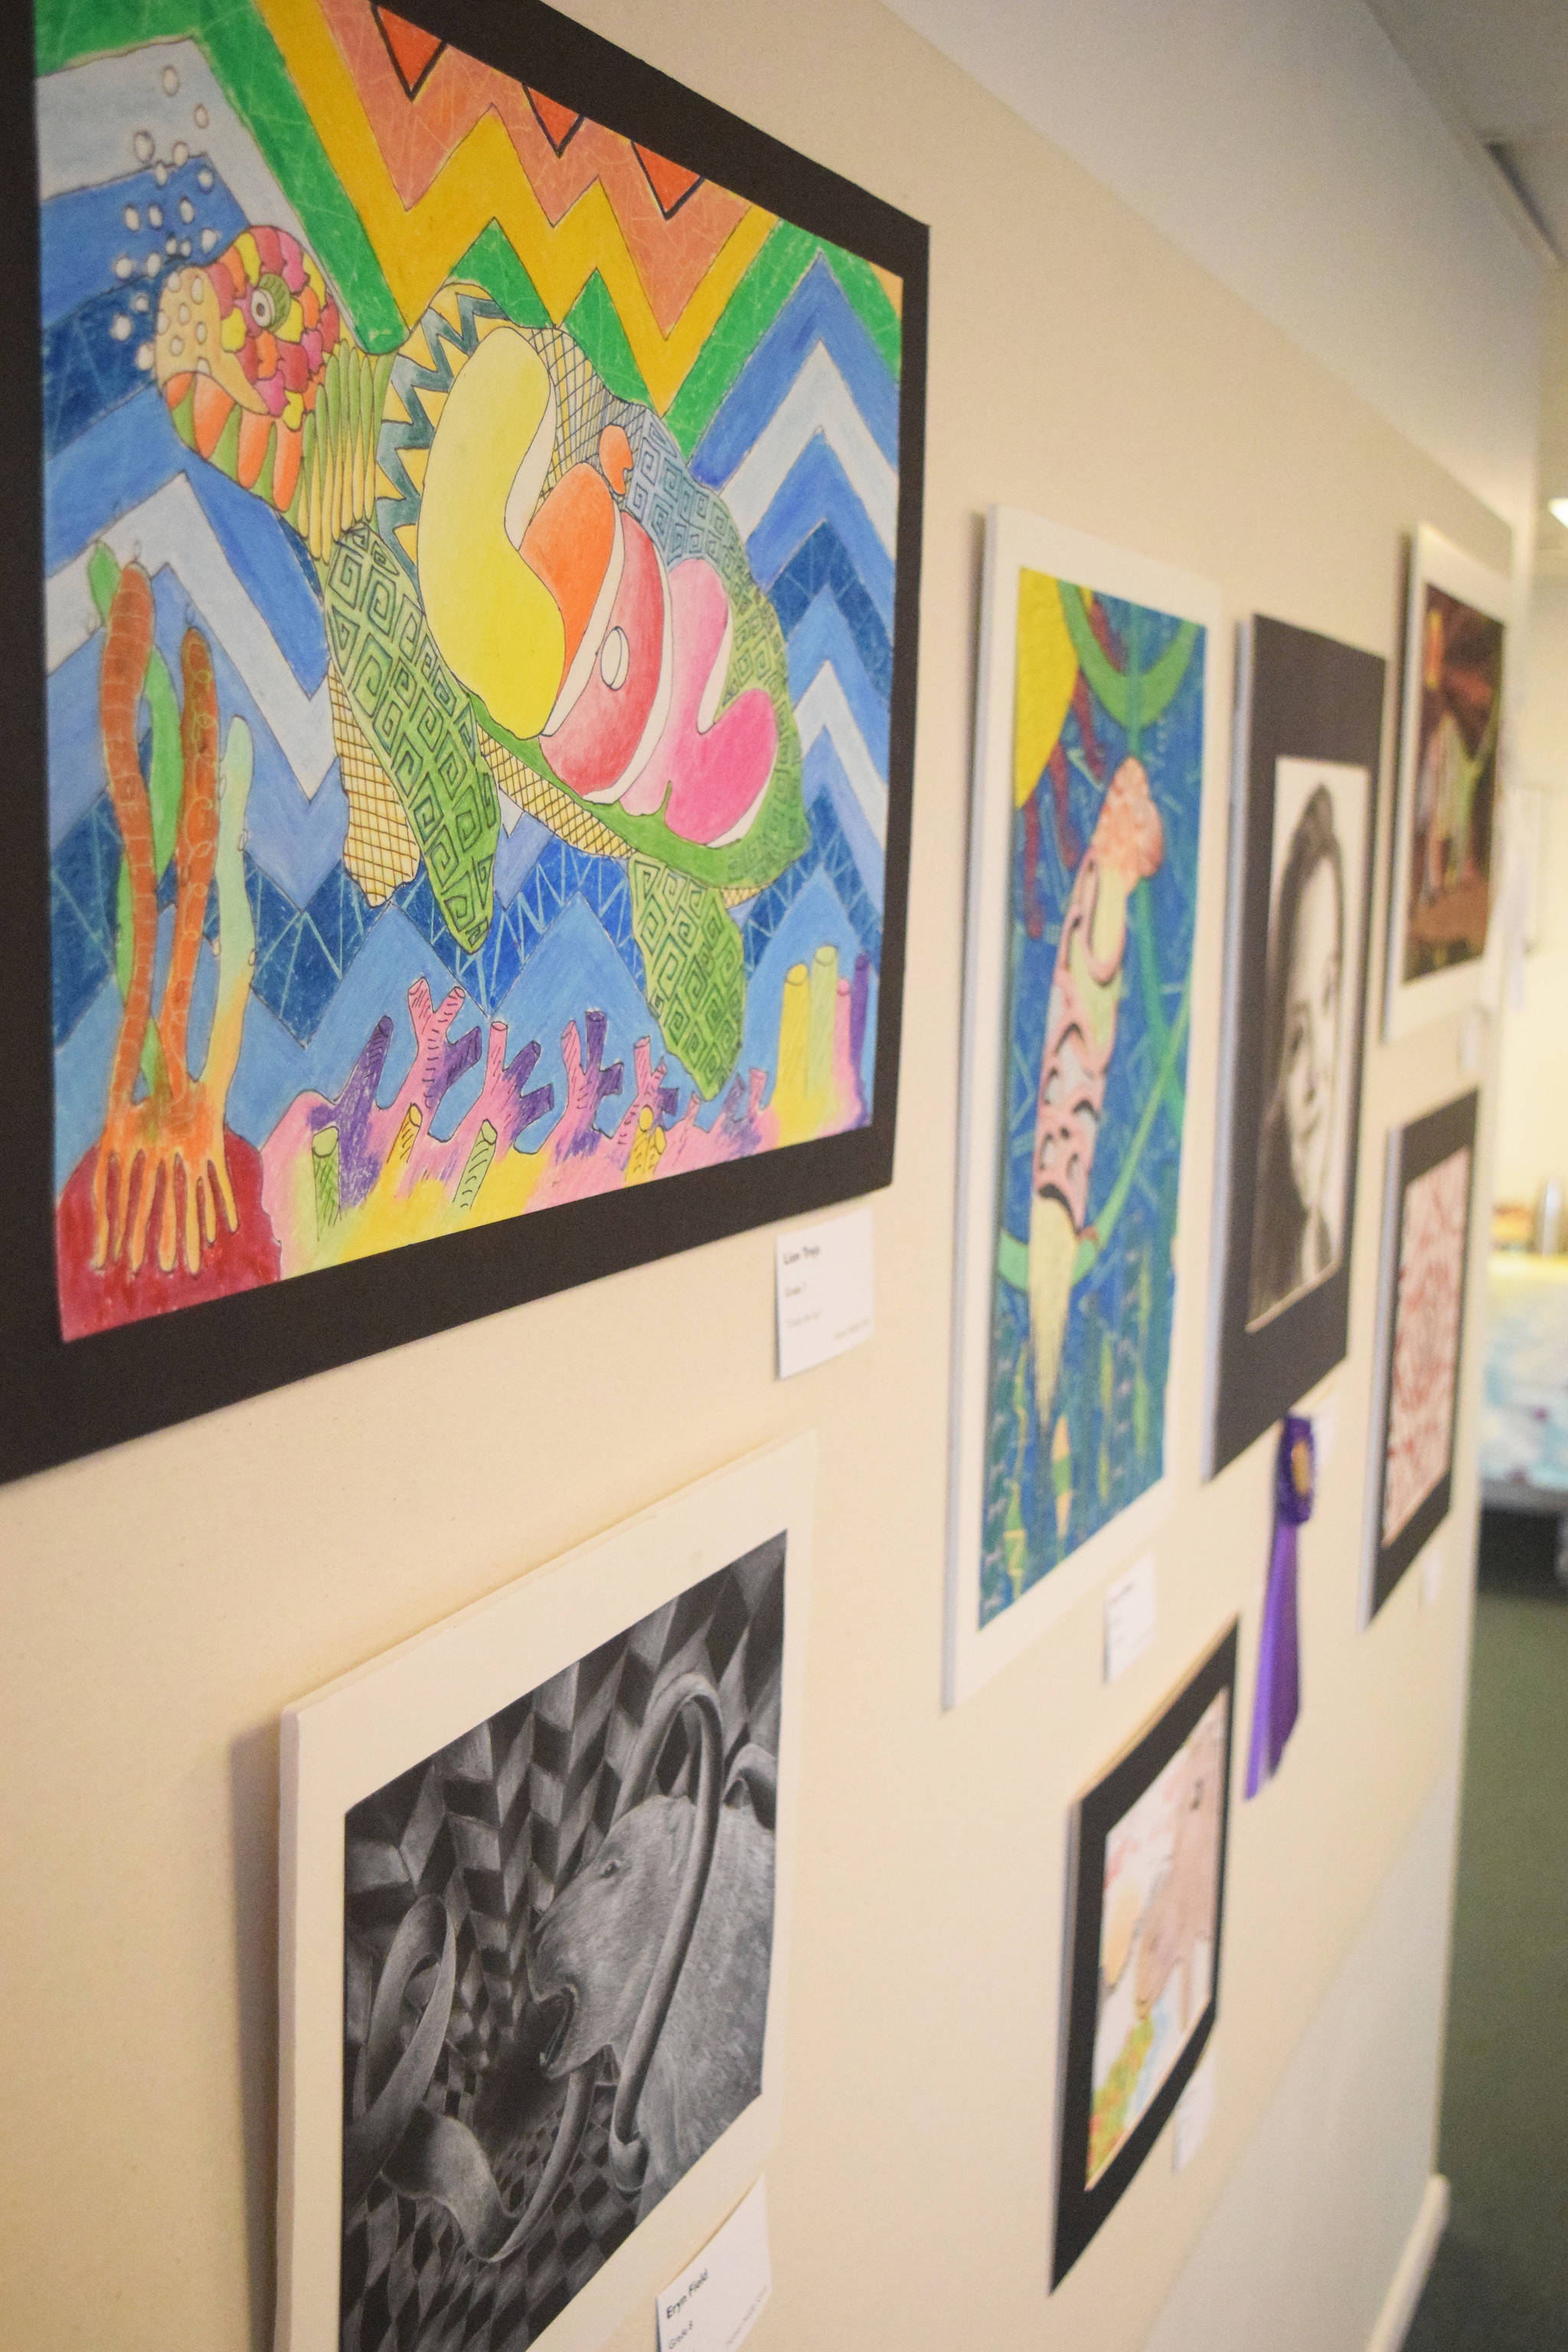 Art pieces hang in the middle school gallery during Thursday’s opening reception of the 30th anniversary Visual Feast art show. (Photo by Joey Klecka/Peninsula Clarion)